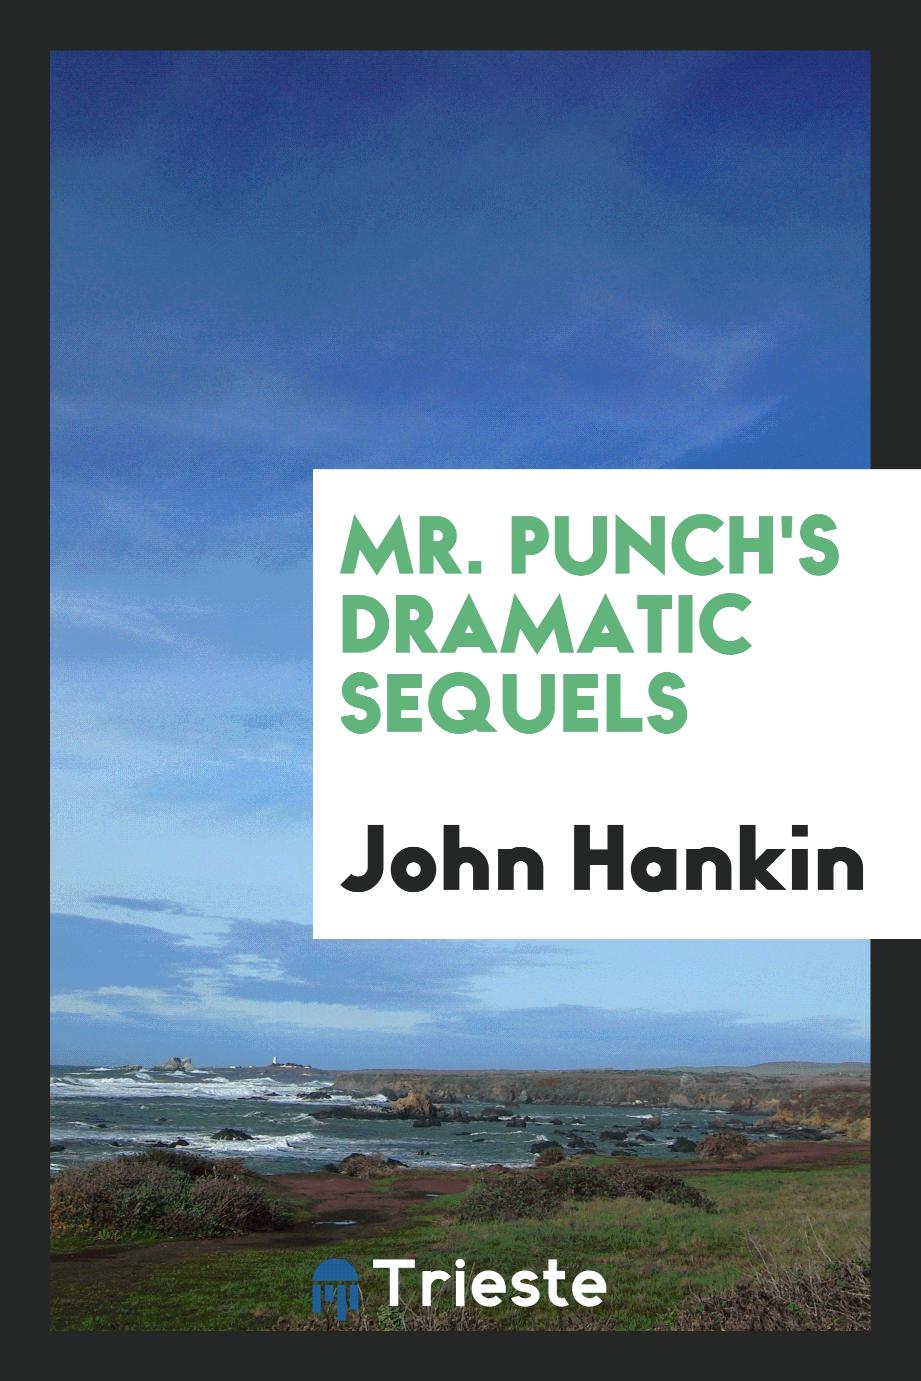 Mr. Punch's dramatic sequels